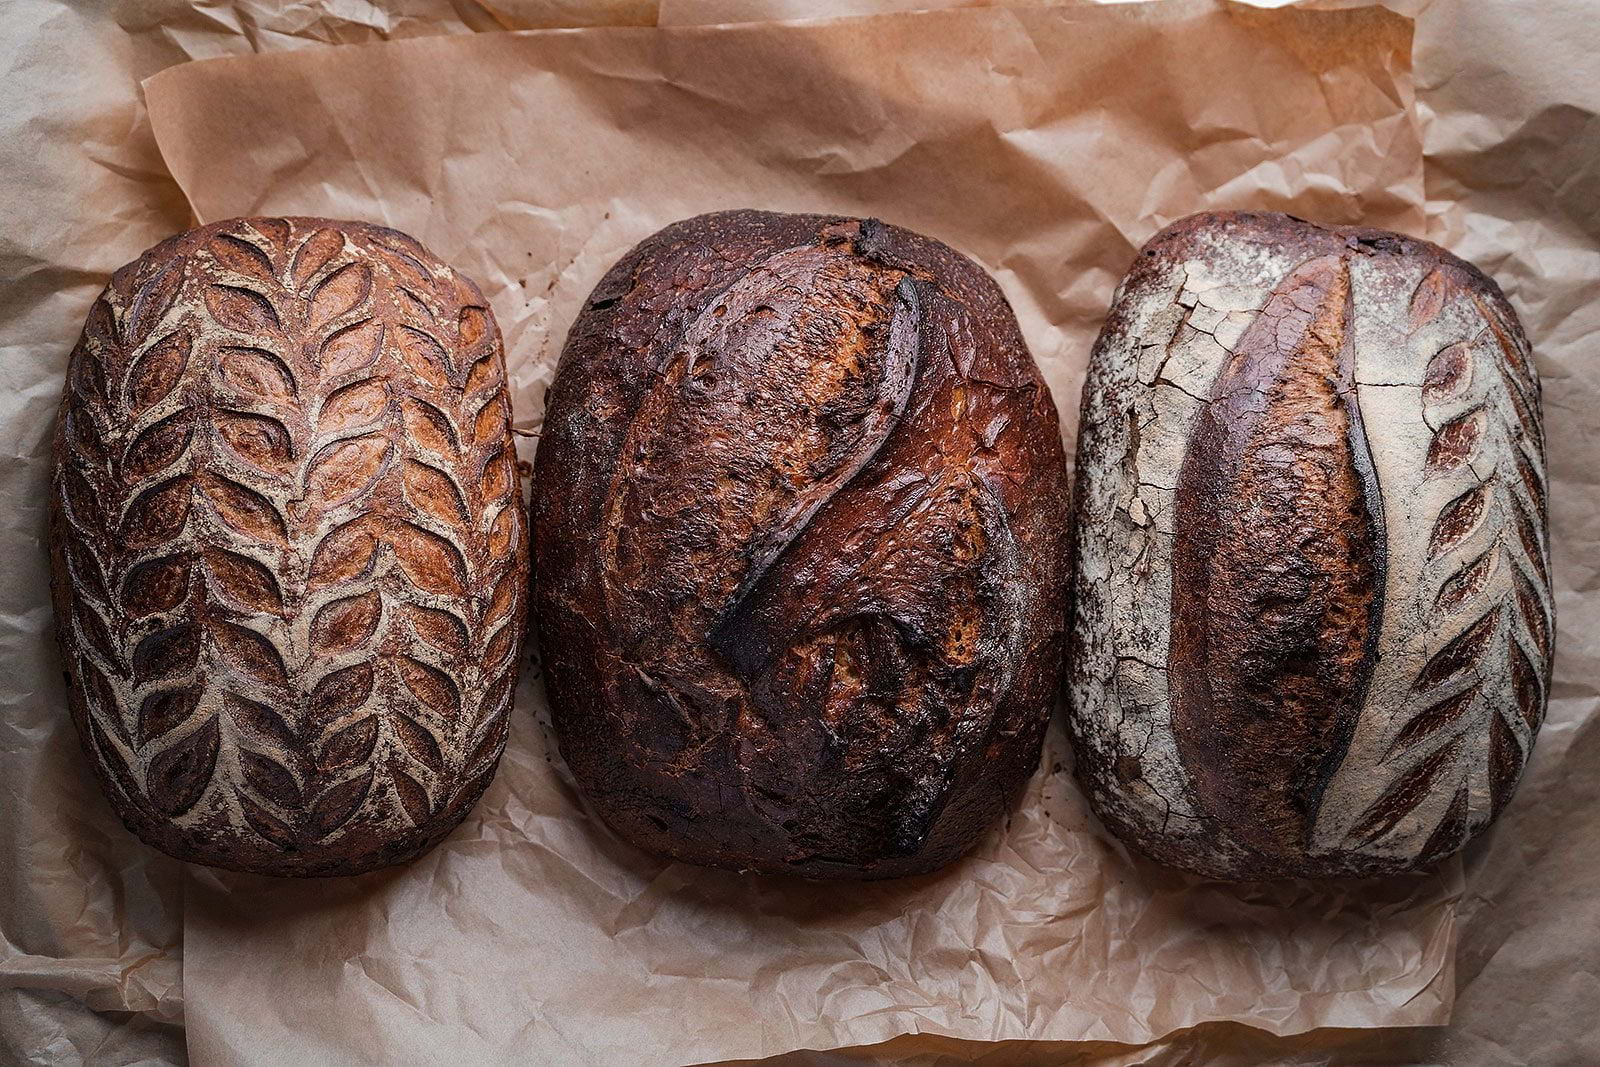 Guide to the best bakeries in London